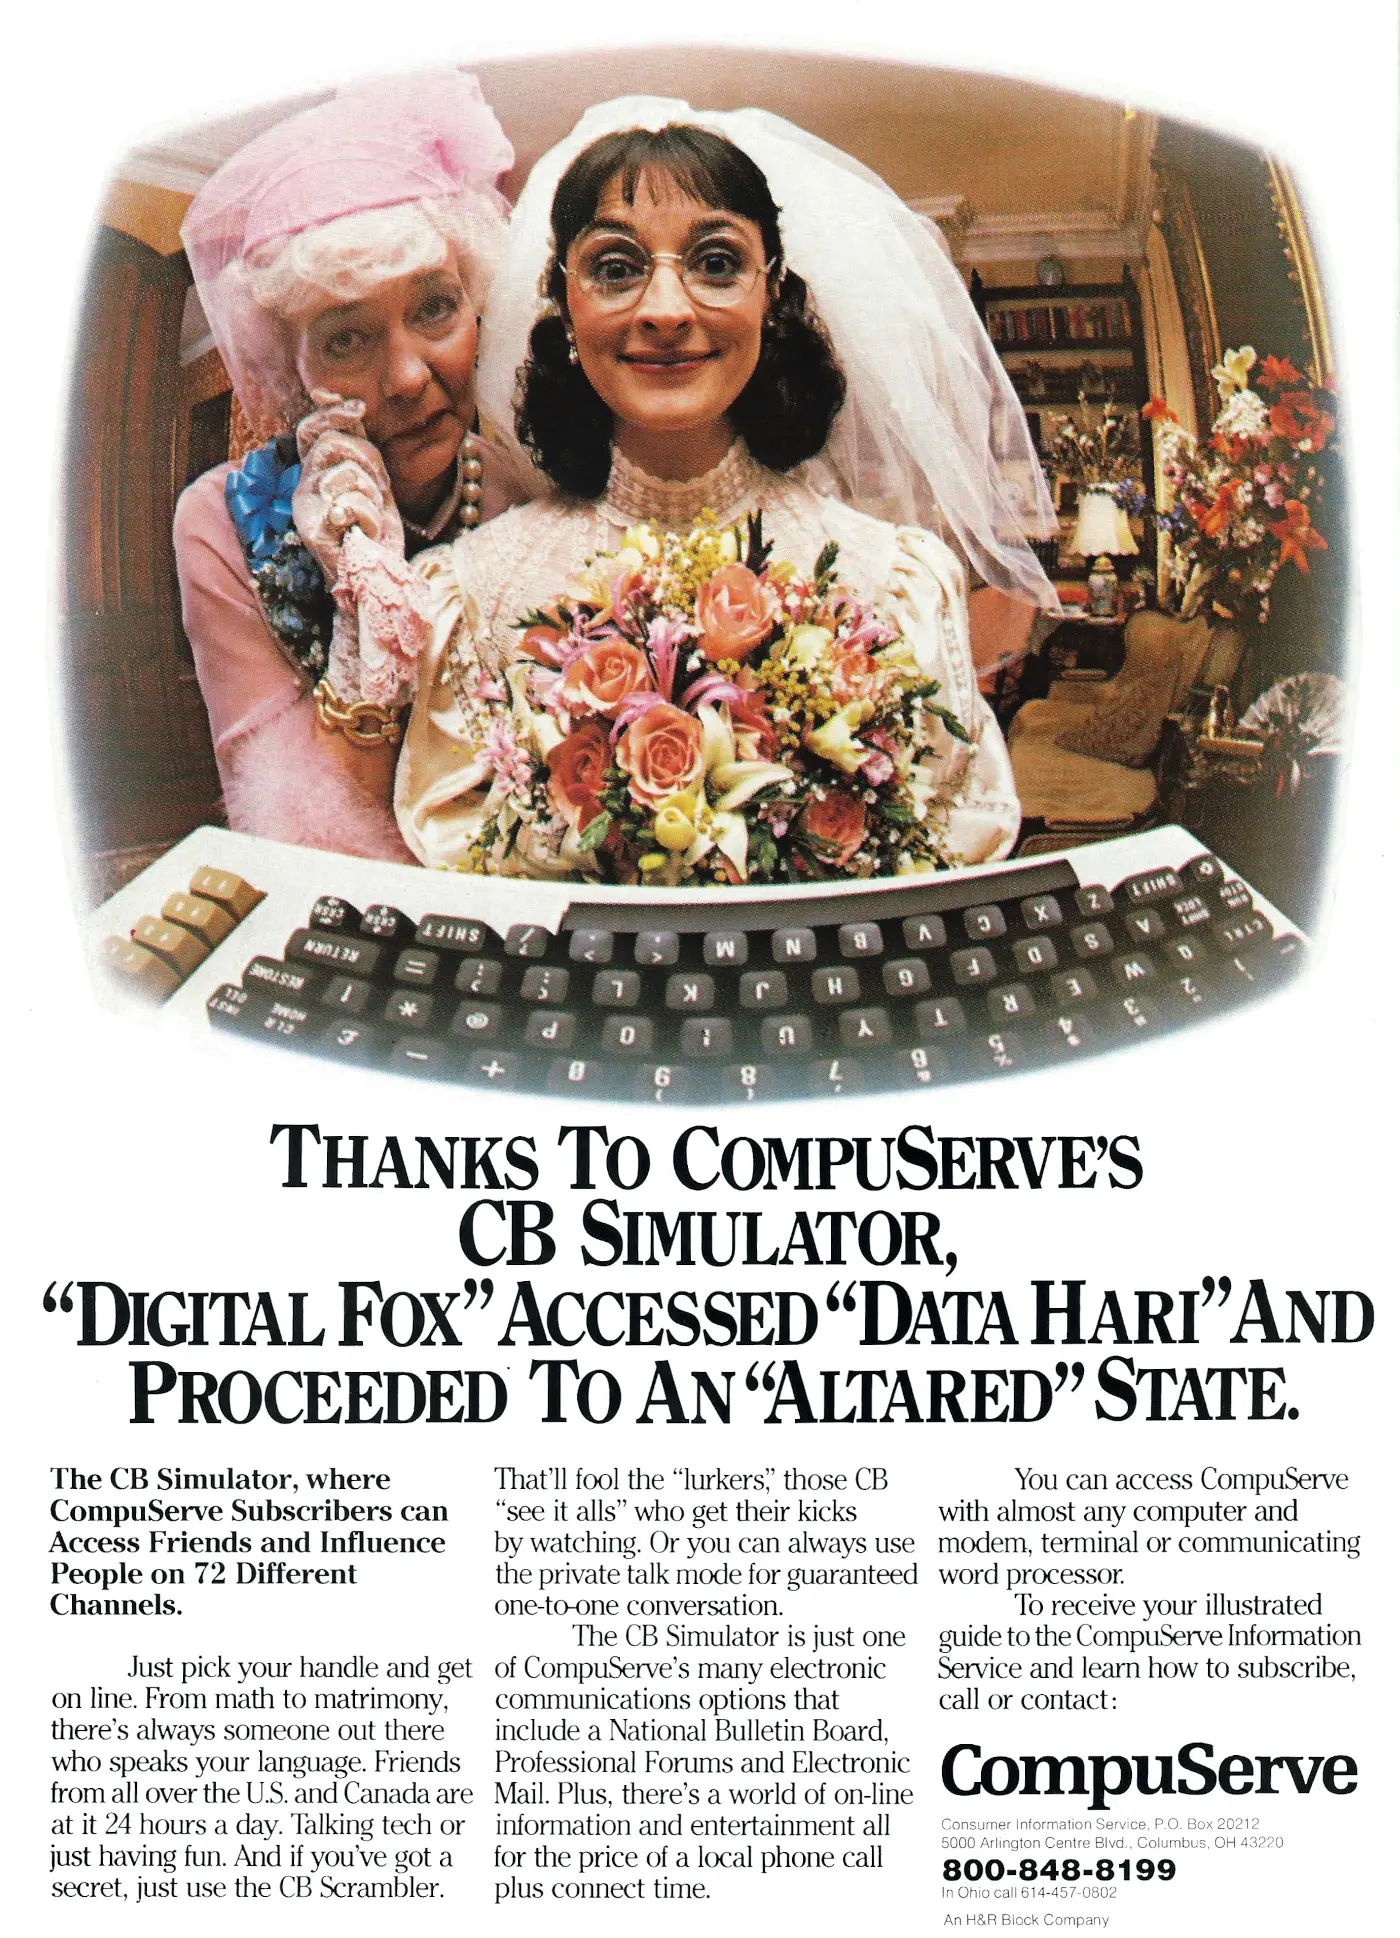 Compuserve Advert: Thanks to CompuServe's CB Simulator, 'Digital Fox' Accessed 'Data Hari' and Proceeded to an 'Altared' State, from Compute's Gazette, August 1984